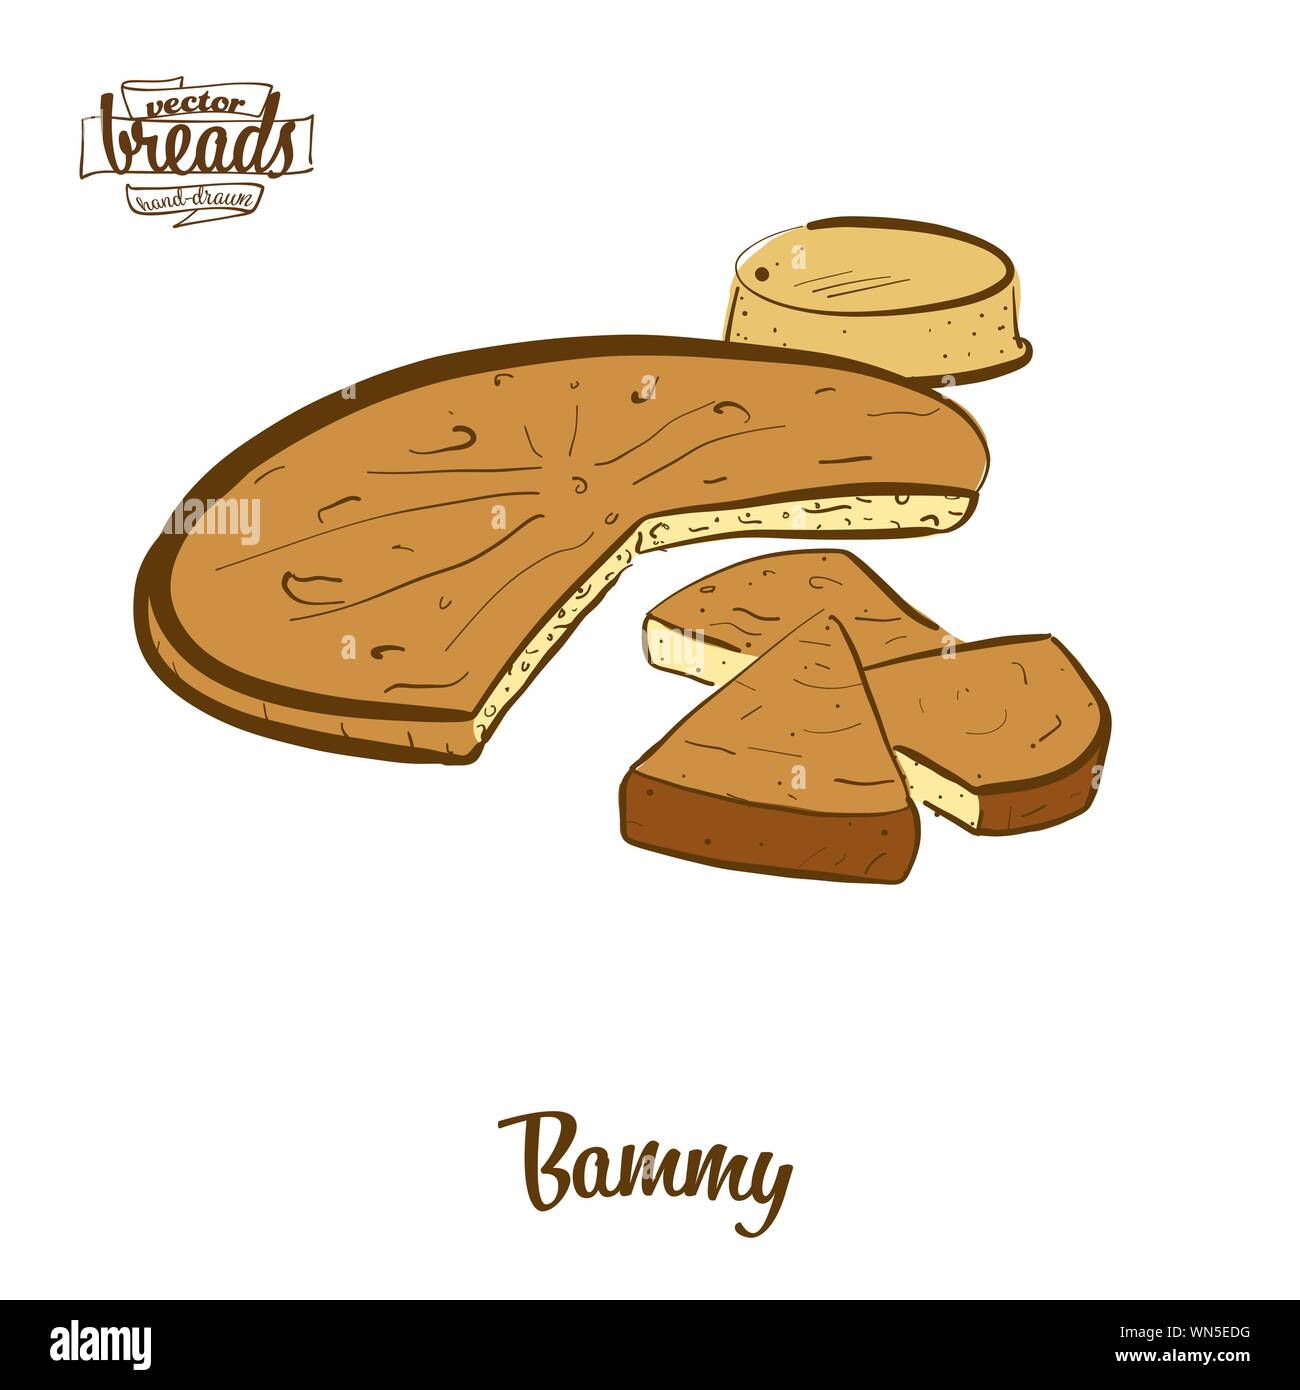 Colored drawing of Bammy bread. Vector illustration of Flatbread food, usually known in Jamaica. Colored Bread sketches. Stock Vector